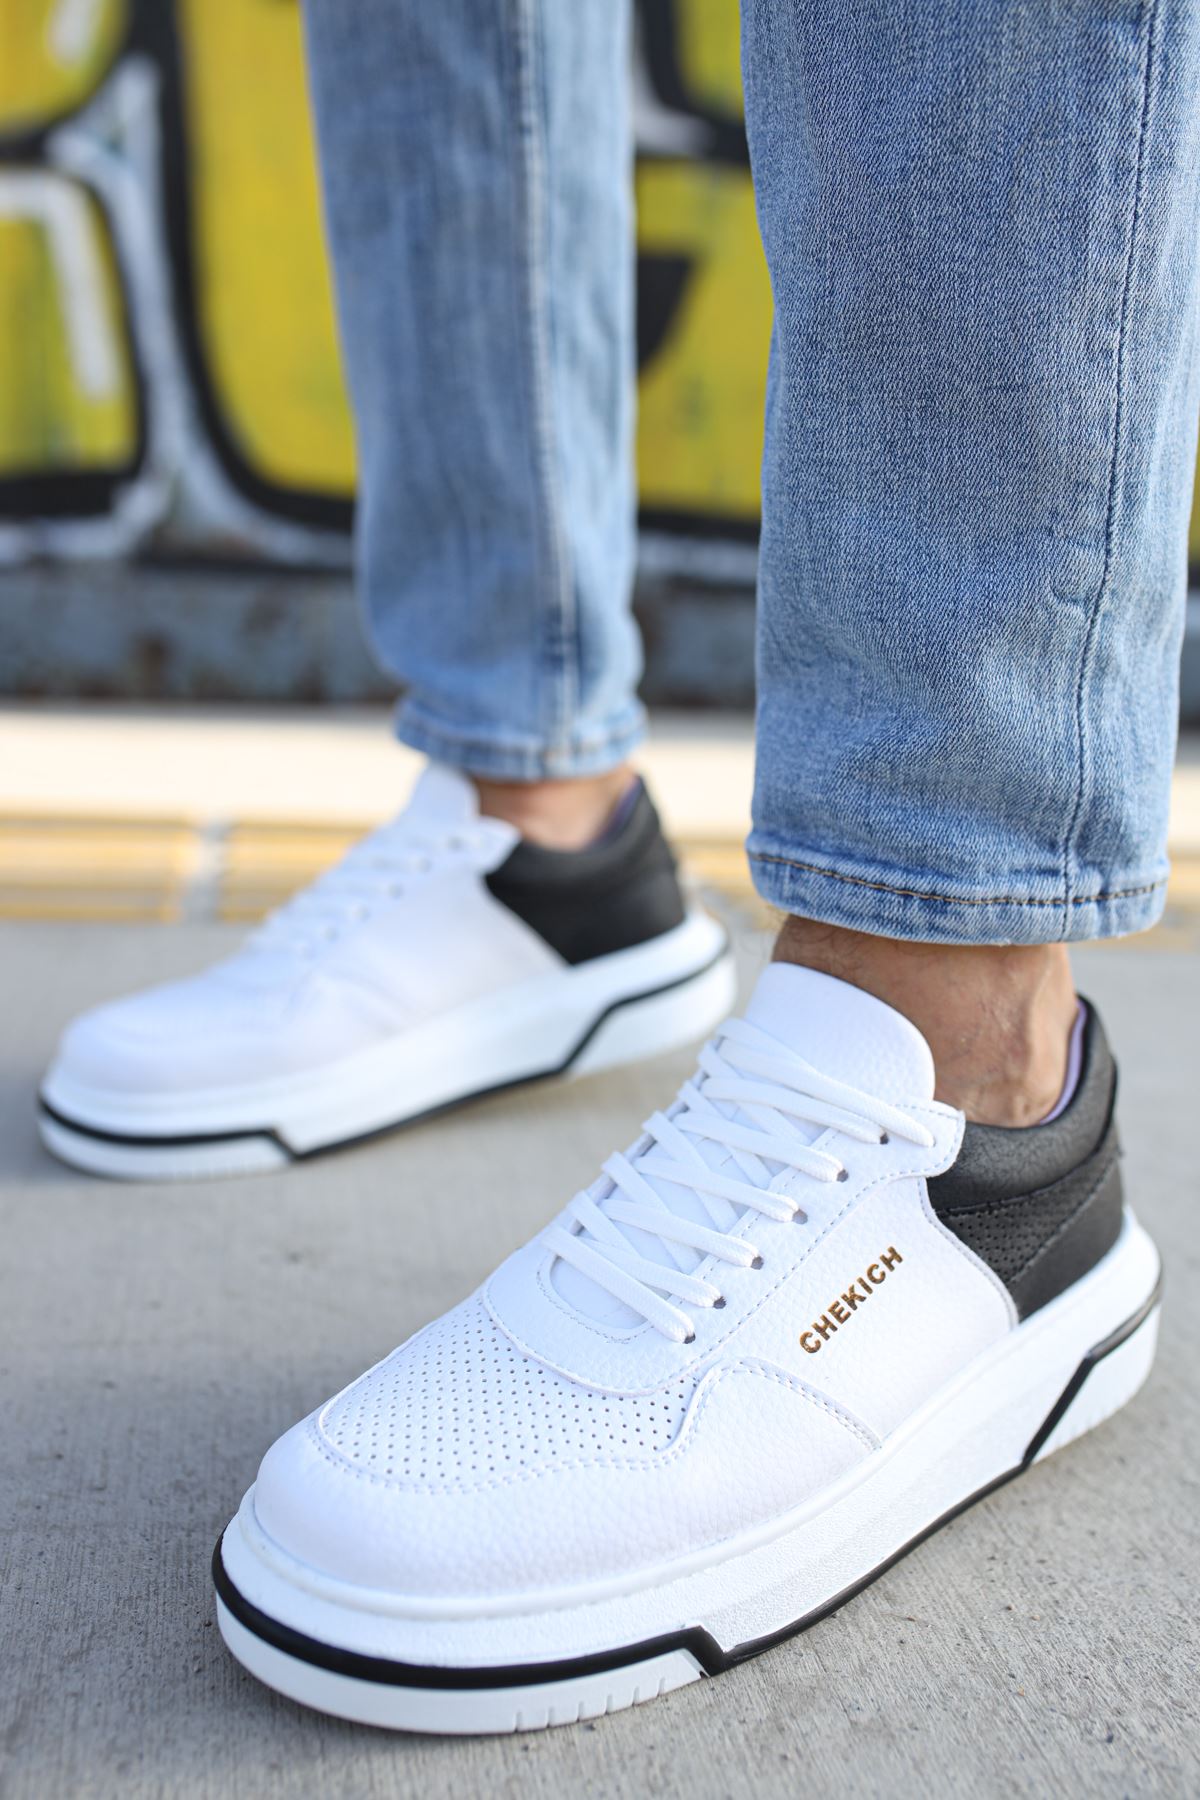 CH075 Men's Unisex White Casual Sneaker Sports Shoes - STREETMODE ™